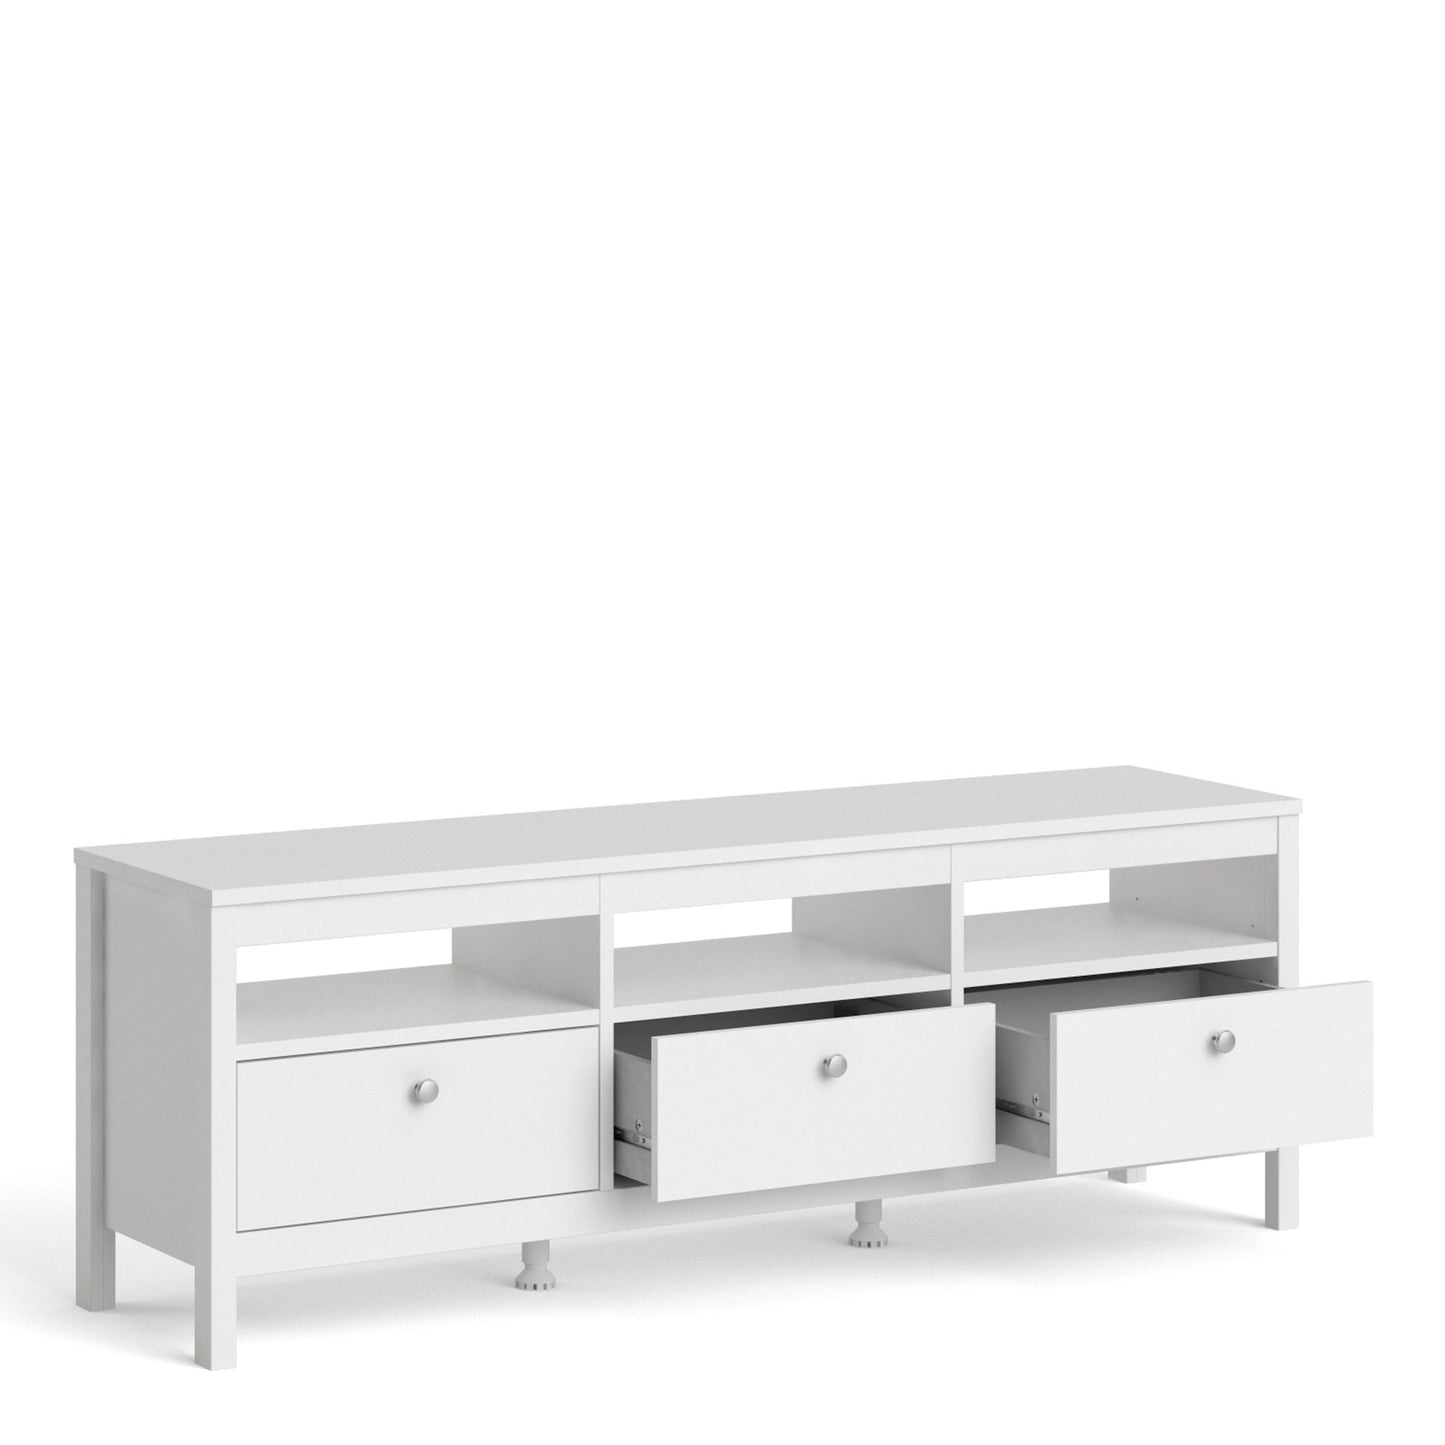 Furniture To Go Madrid TV-Unit 3 Drawers in White